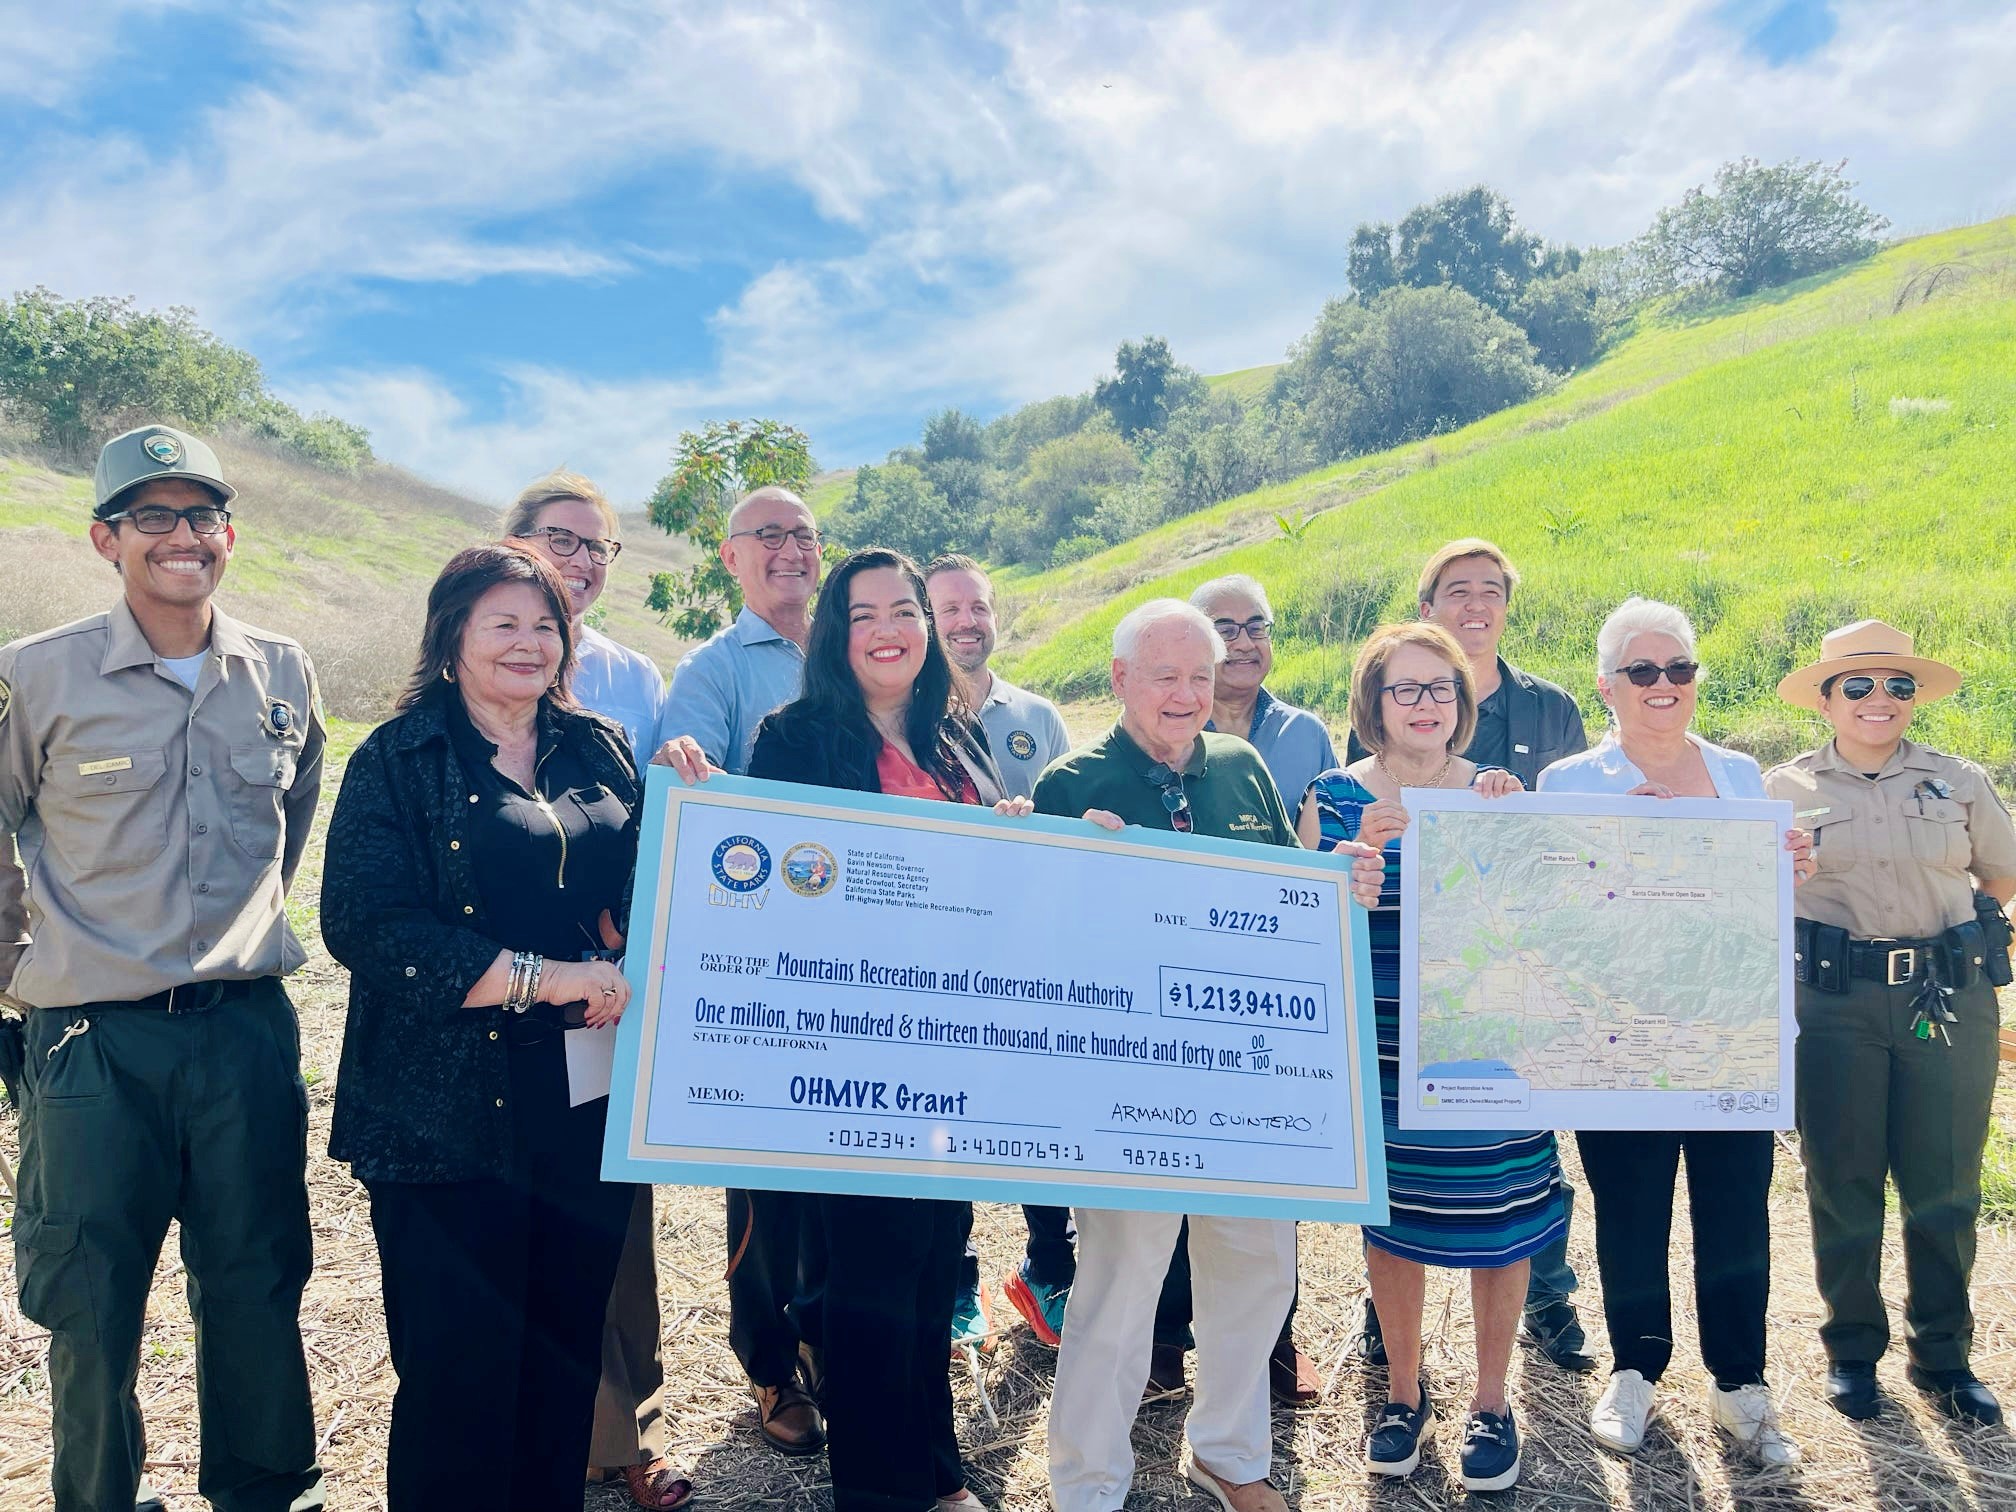 Assemblymember Carrillo and other state government officials and community leaders present a symbolic check to the Mountains Recreation and Conservation Authority (MRCA) 